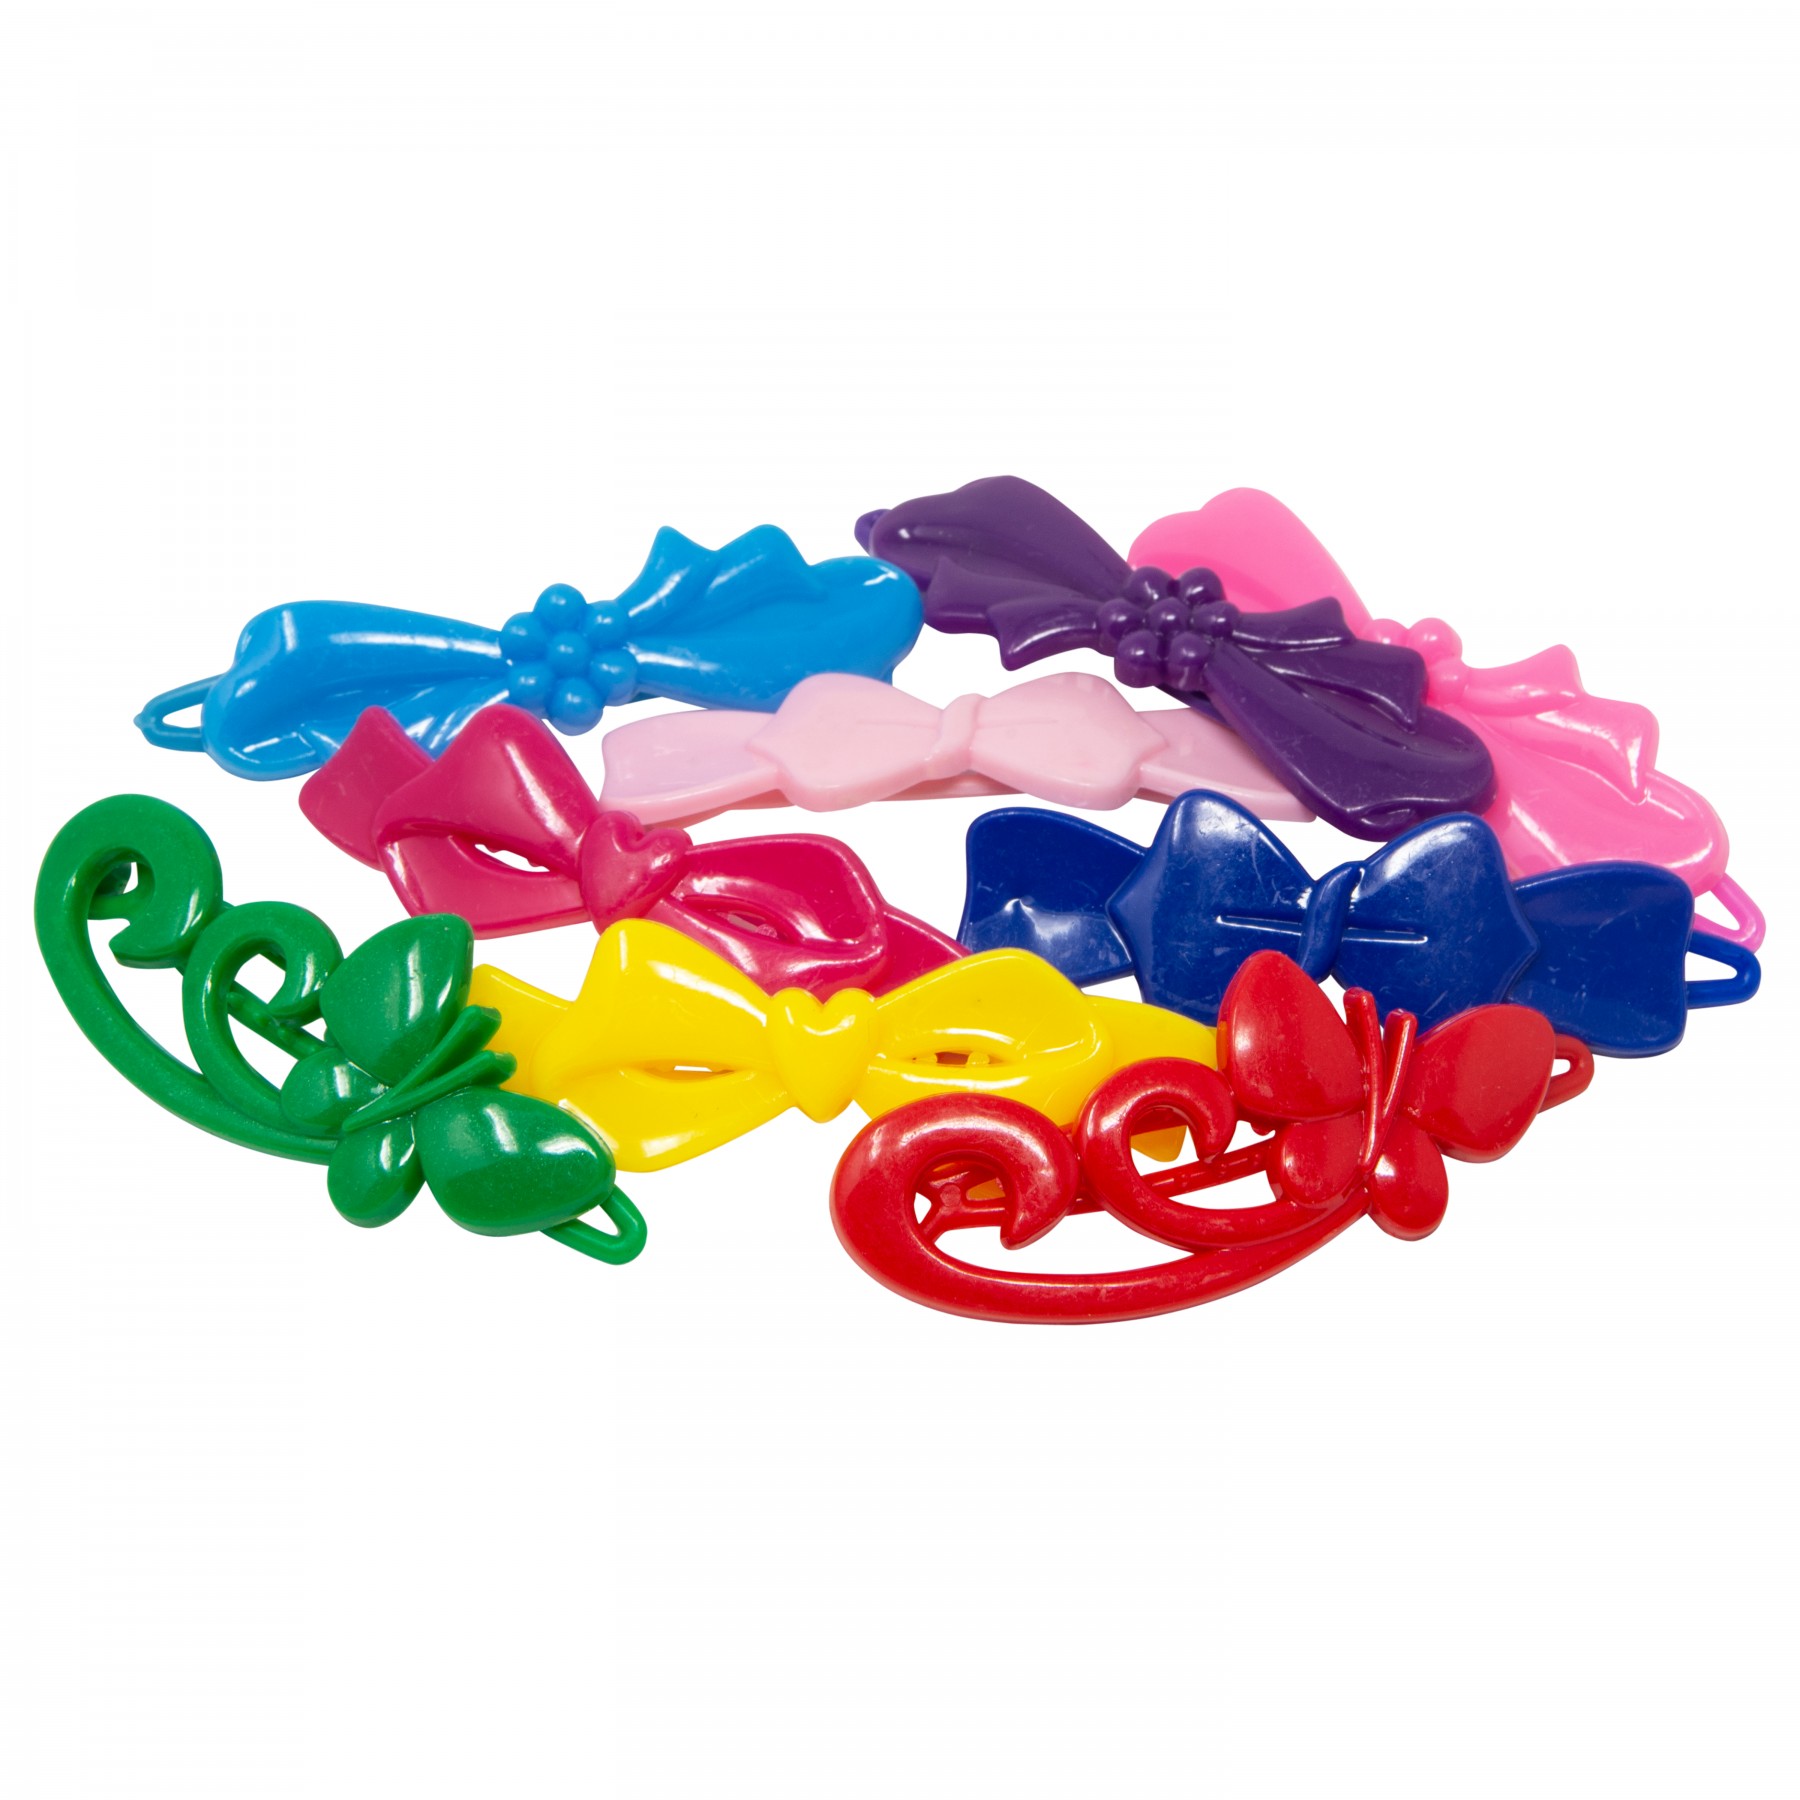 Set of 5 1980s hair clips